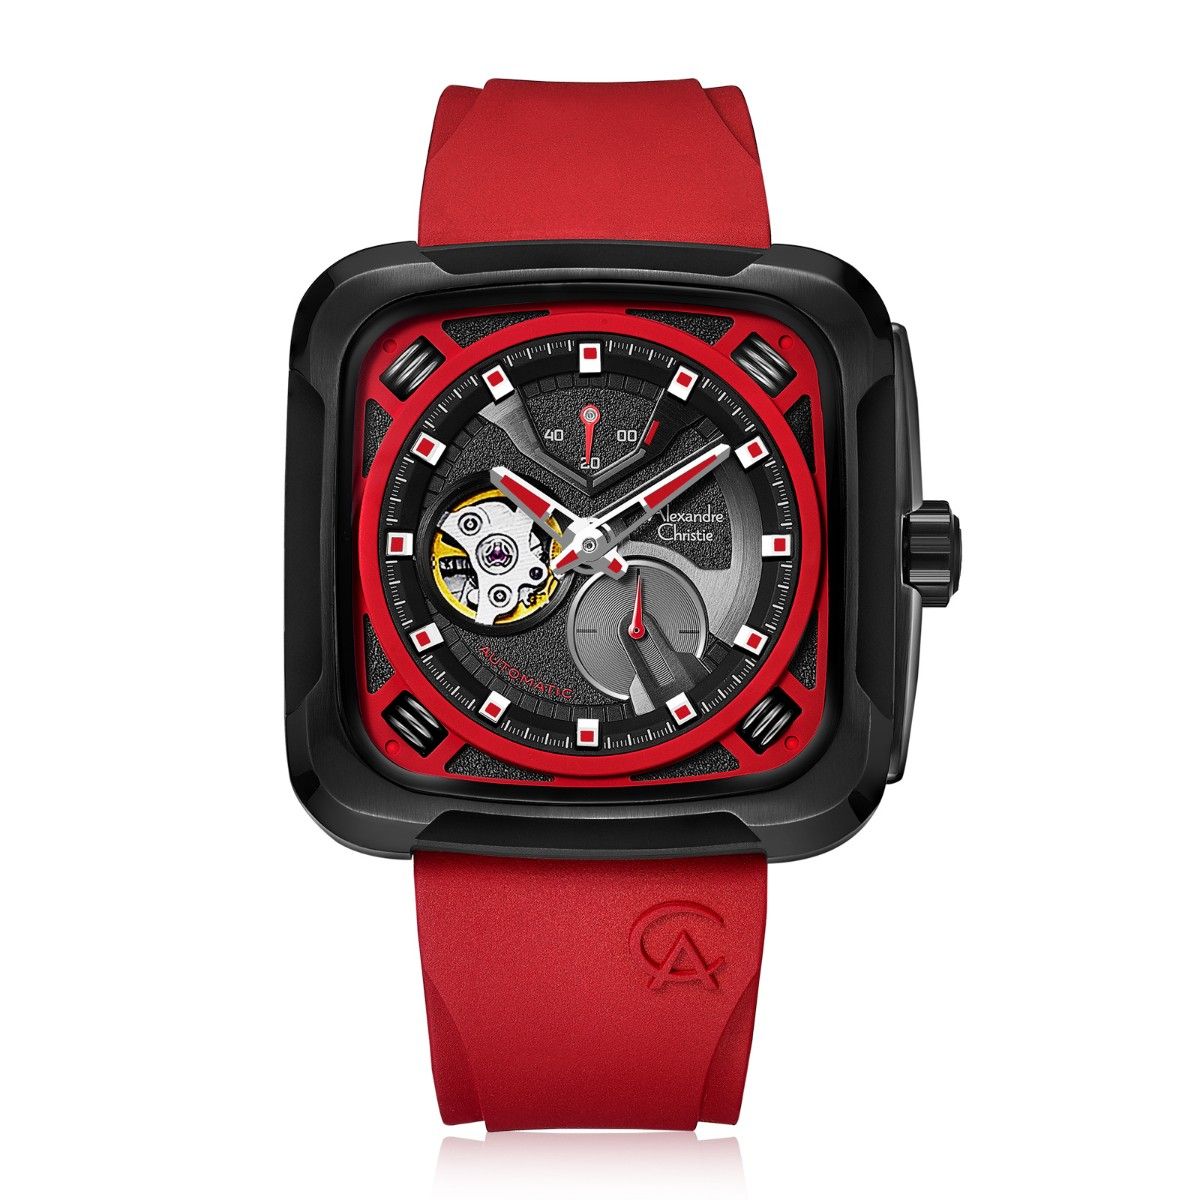 Alexandre Christie 6577 MAR Automatic Watch For Men - Red